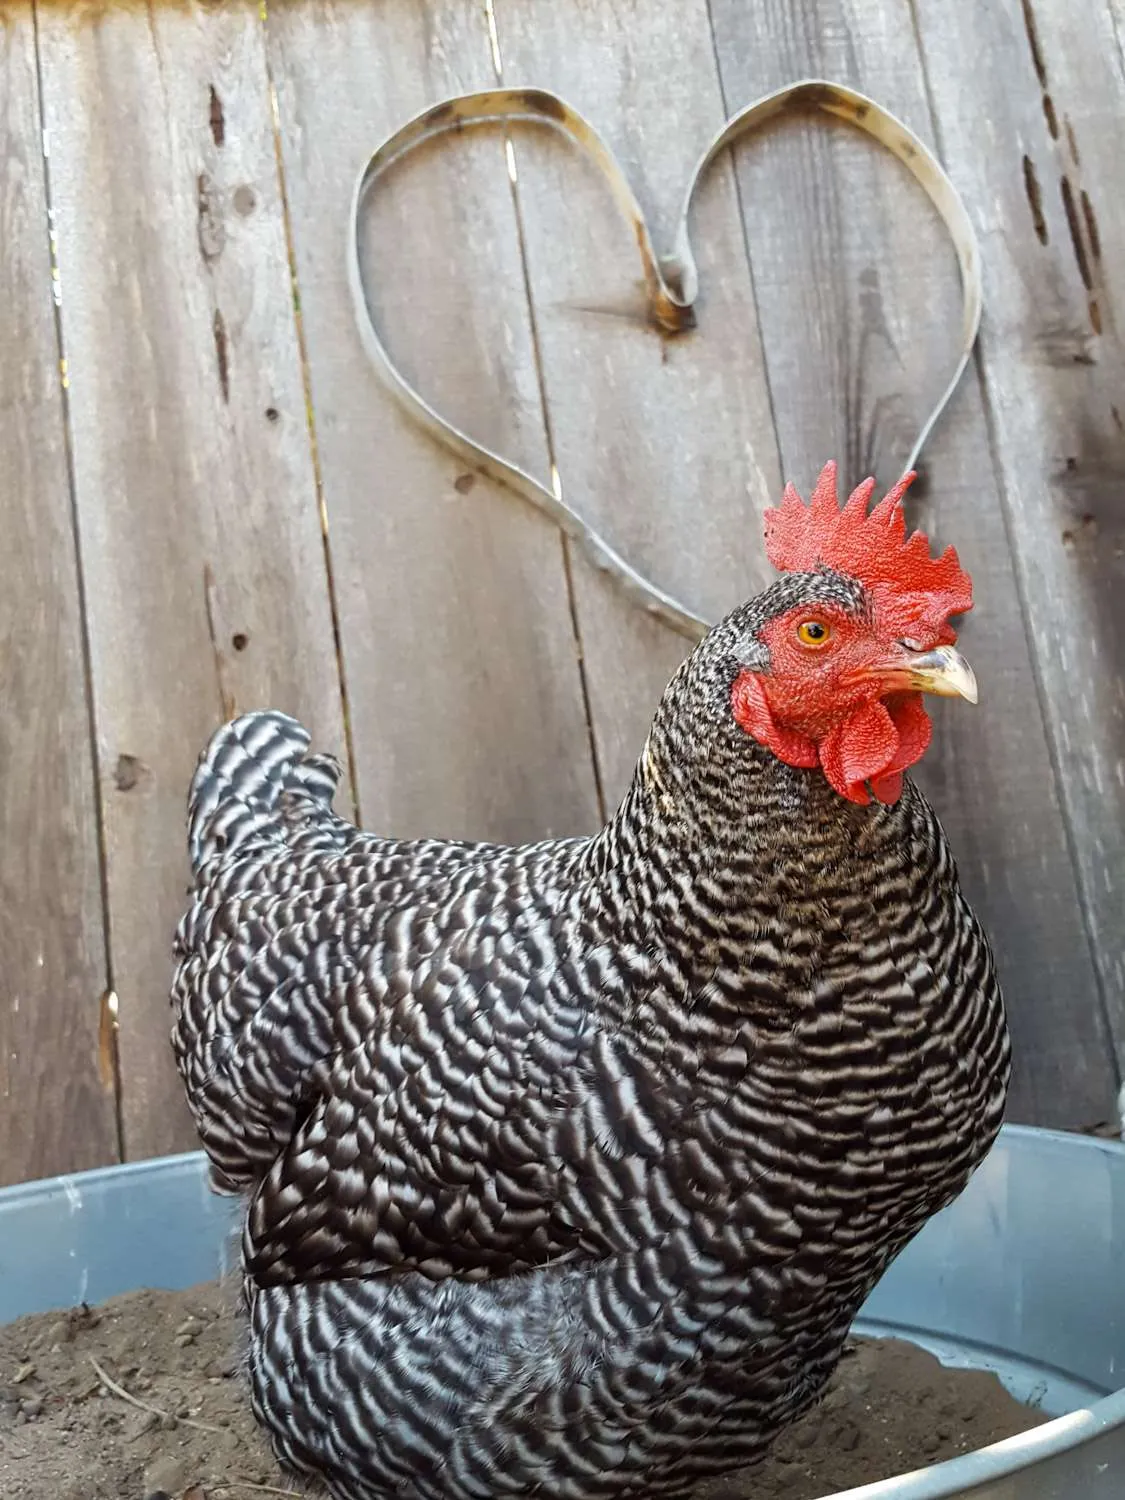 A Barred rock chicken is standing in a metal tub full of dirt which acts as a chicken dust bath. Just beyond is an old fence, a metal hoop has been formed into the shape of a heart which is hanging on the fence. 